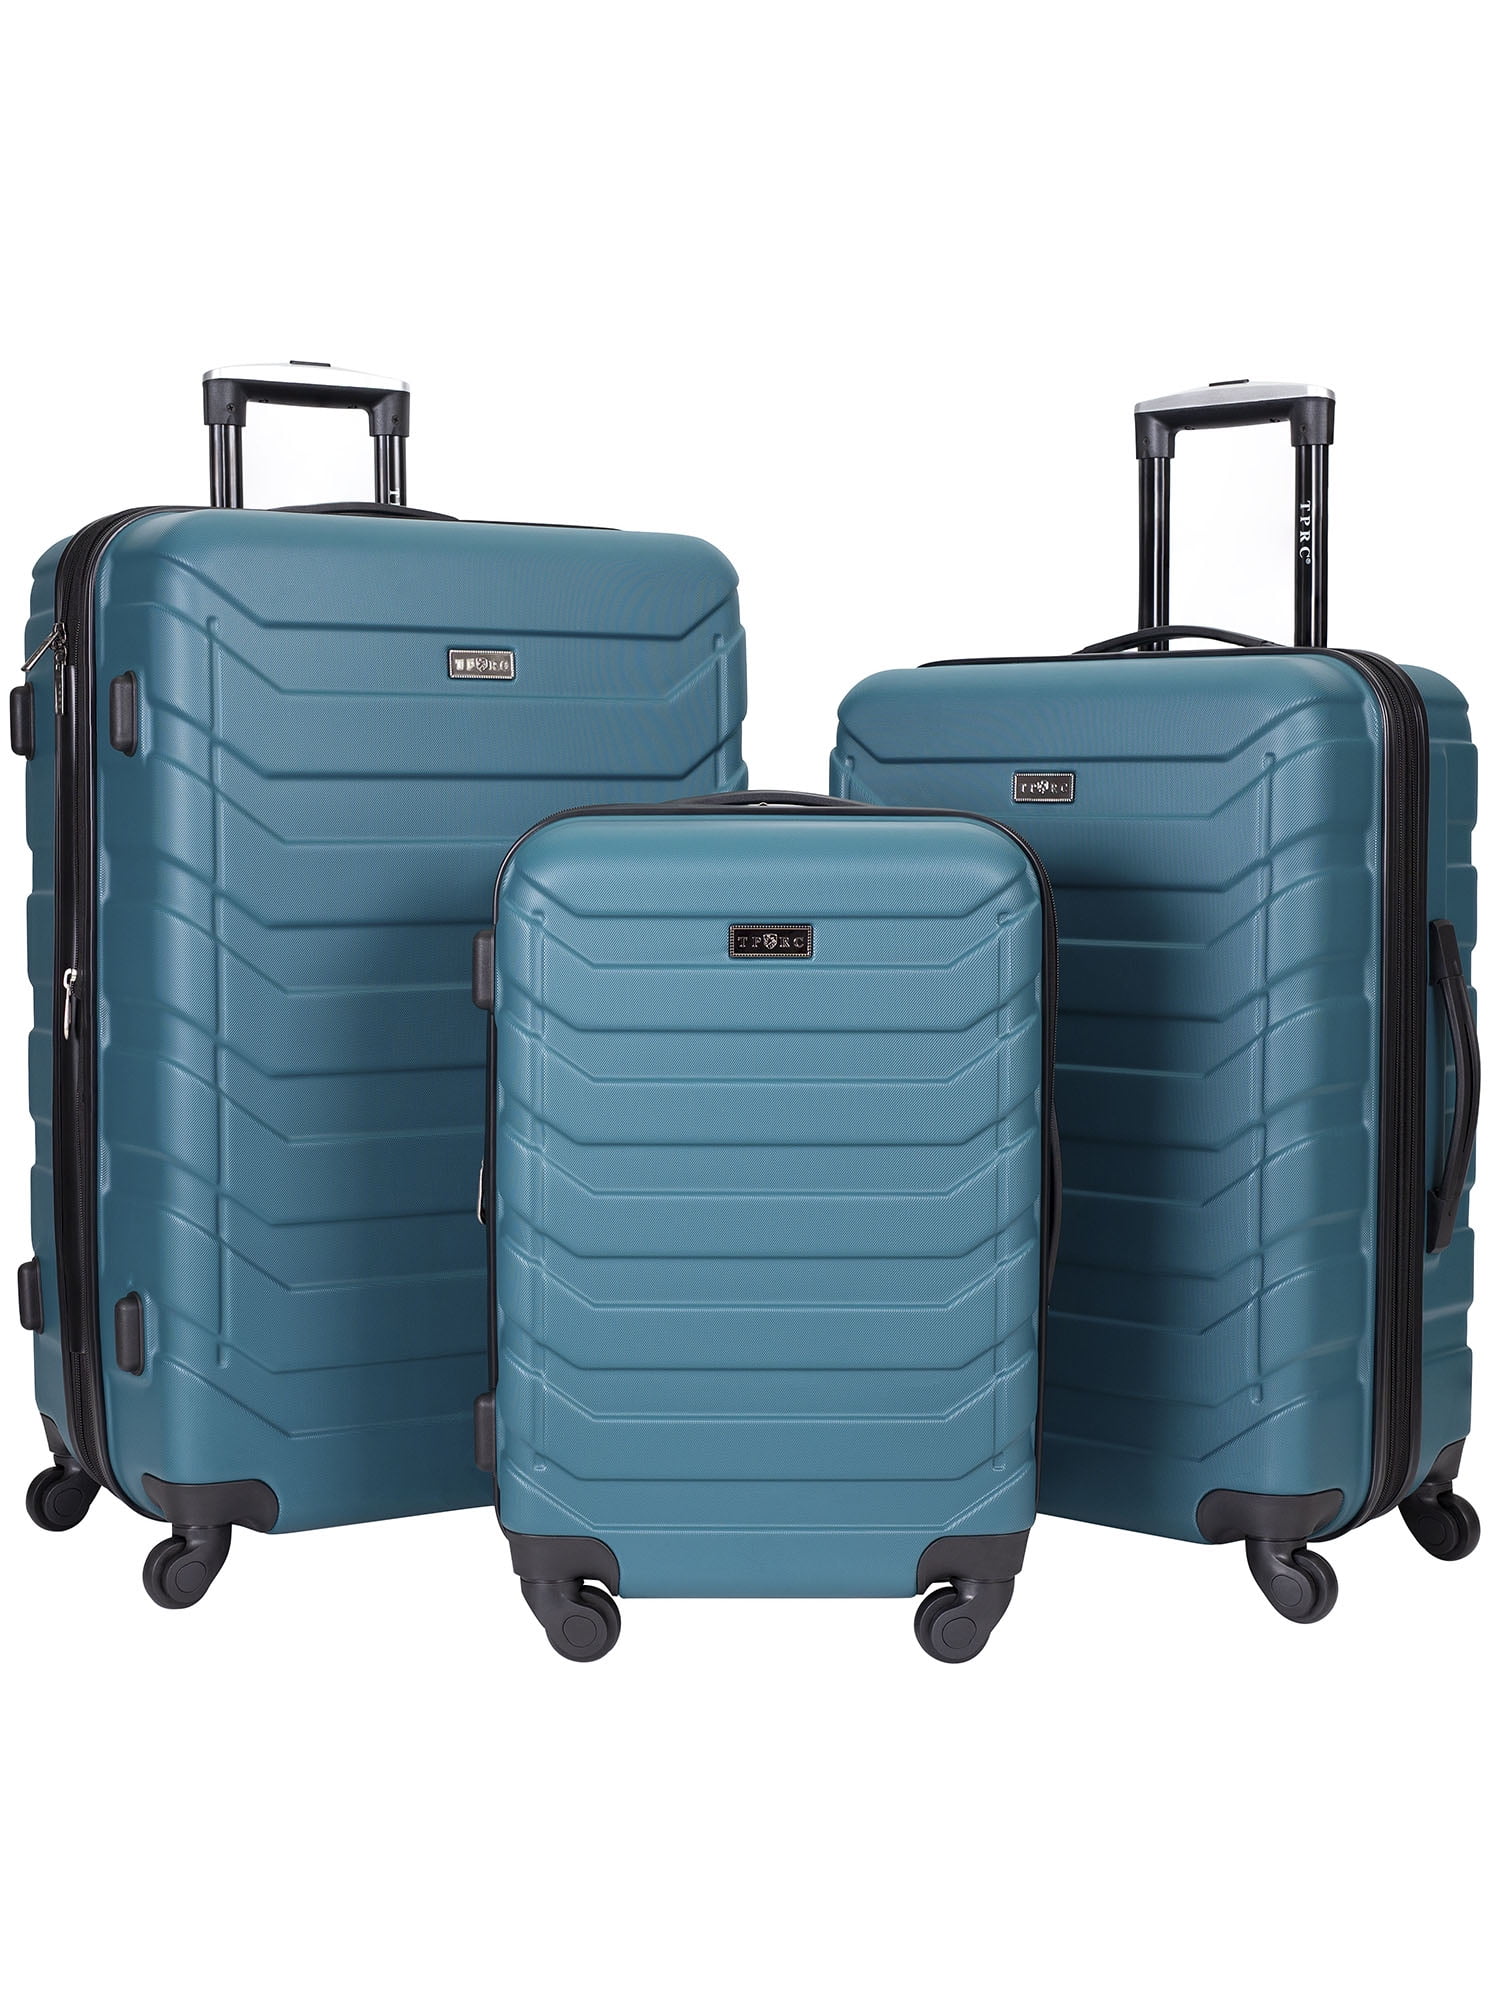 3PC. MADISON HEIGHTS EXPANDABLE ROLLING HARDSIDE LUGGAGE SET, TEAL ...